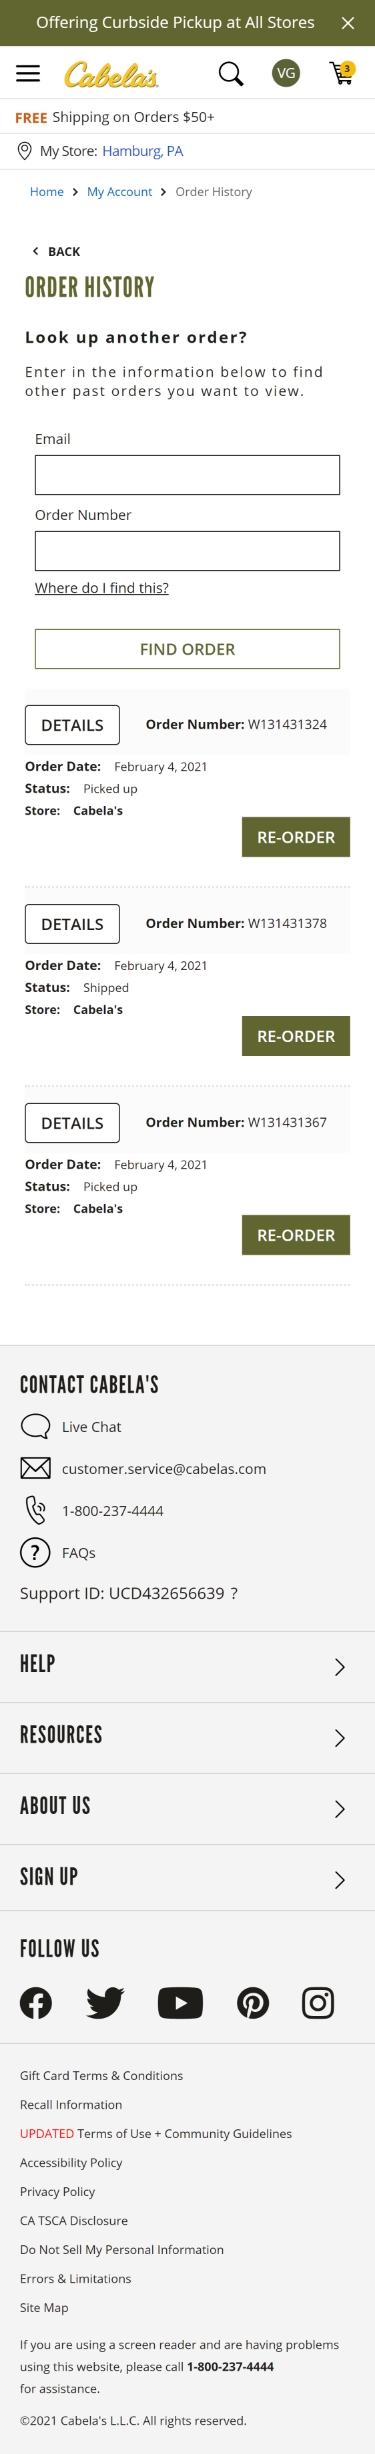 cabelas purchase history mobile